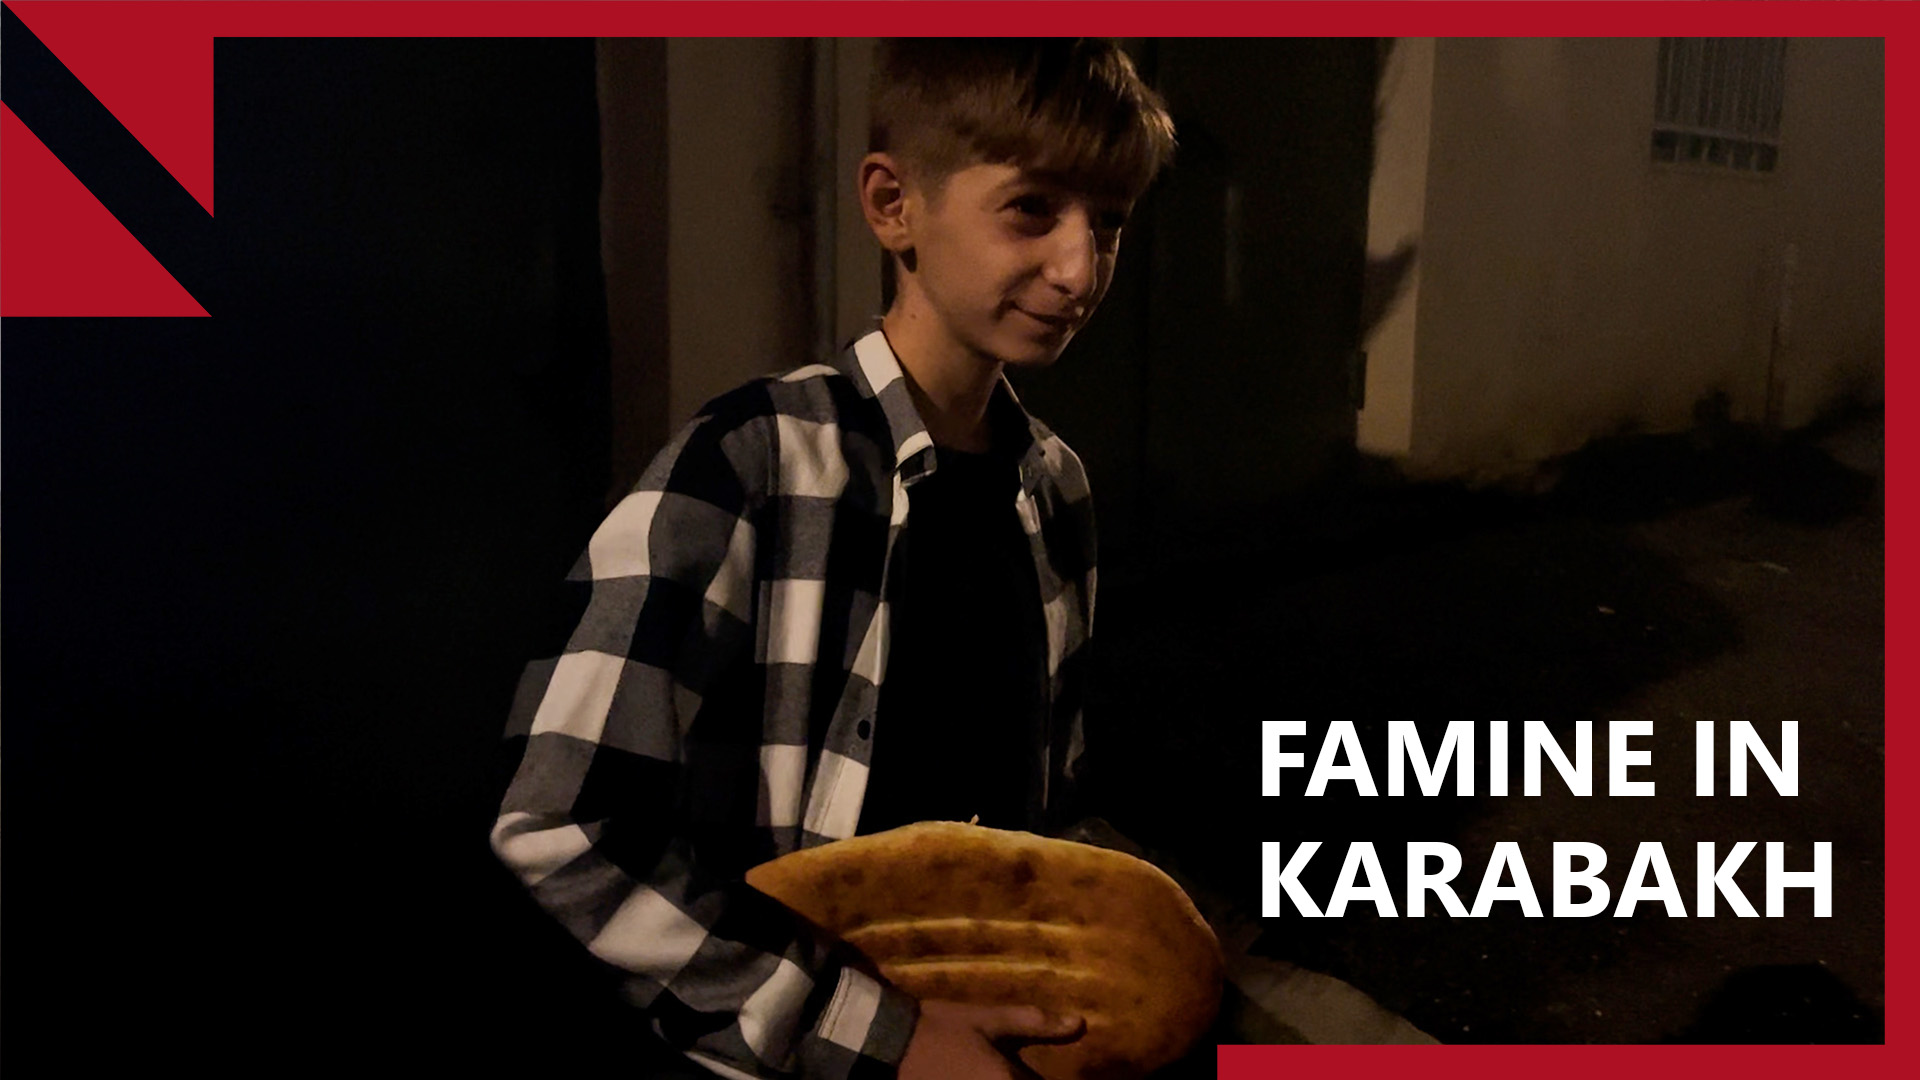 12-year-old Karabakh child spends nights in lines to secure bread for family